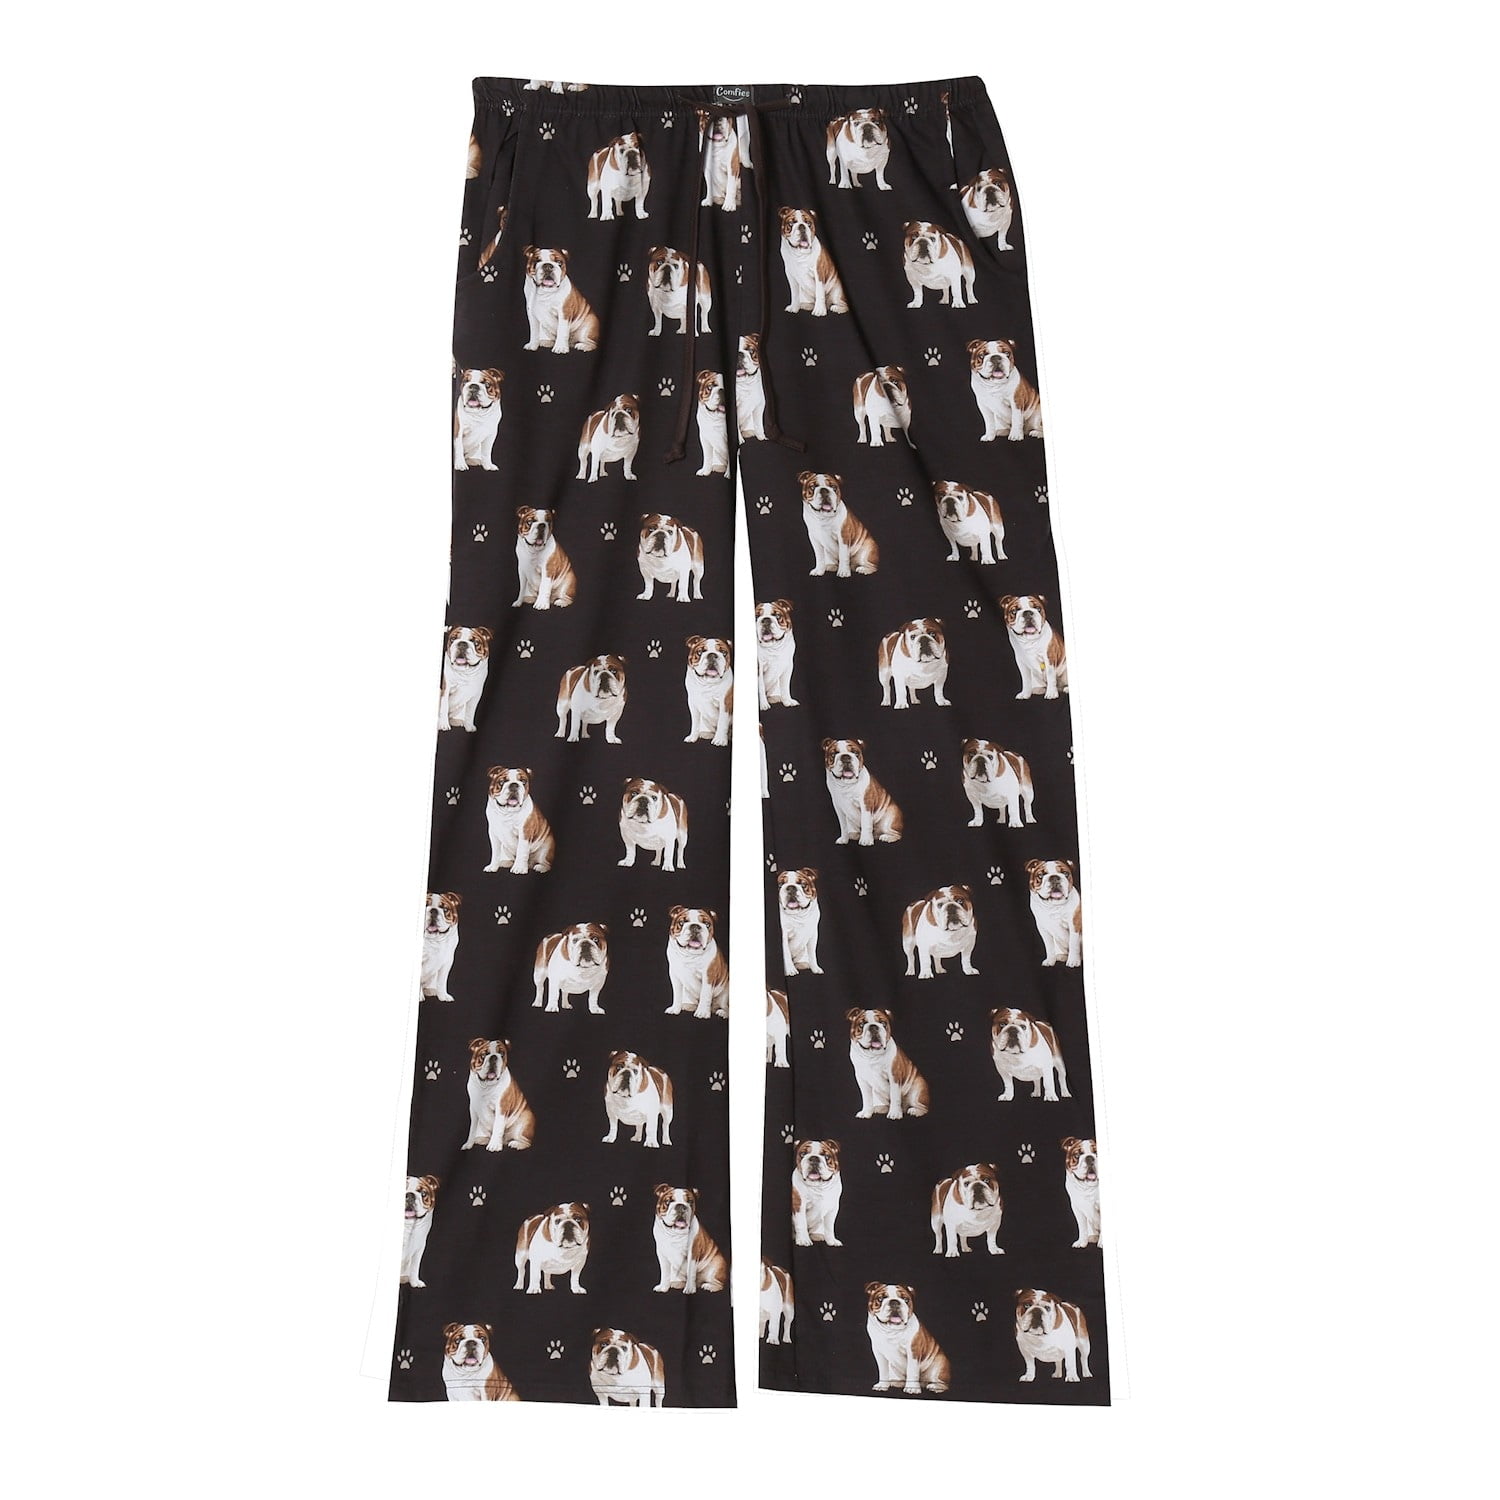 Women's Heart of Dogs Pattern Snuggle Up Sleep Pant